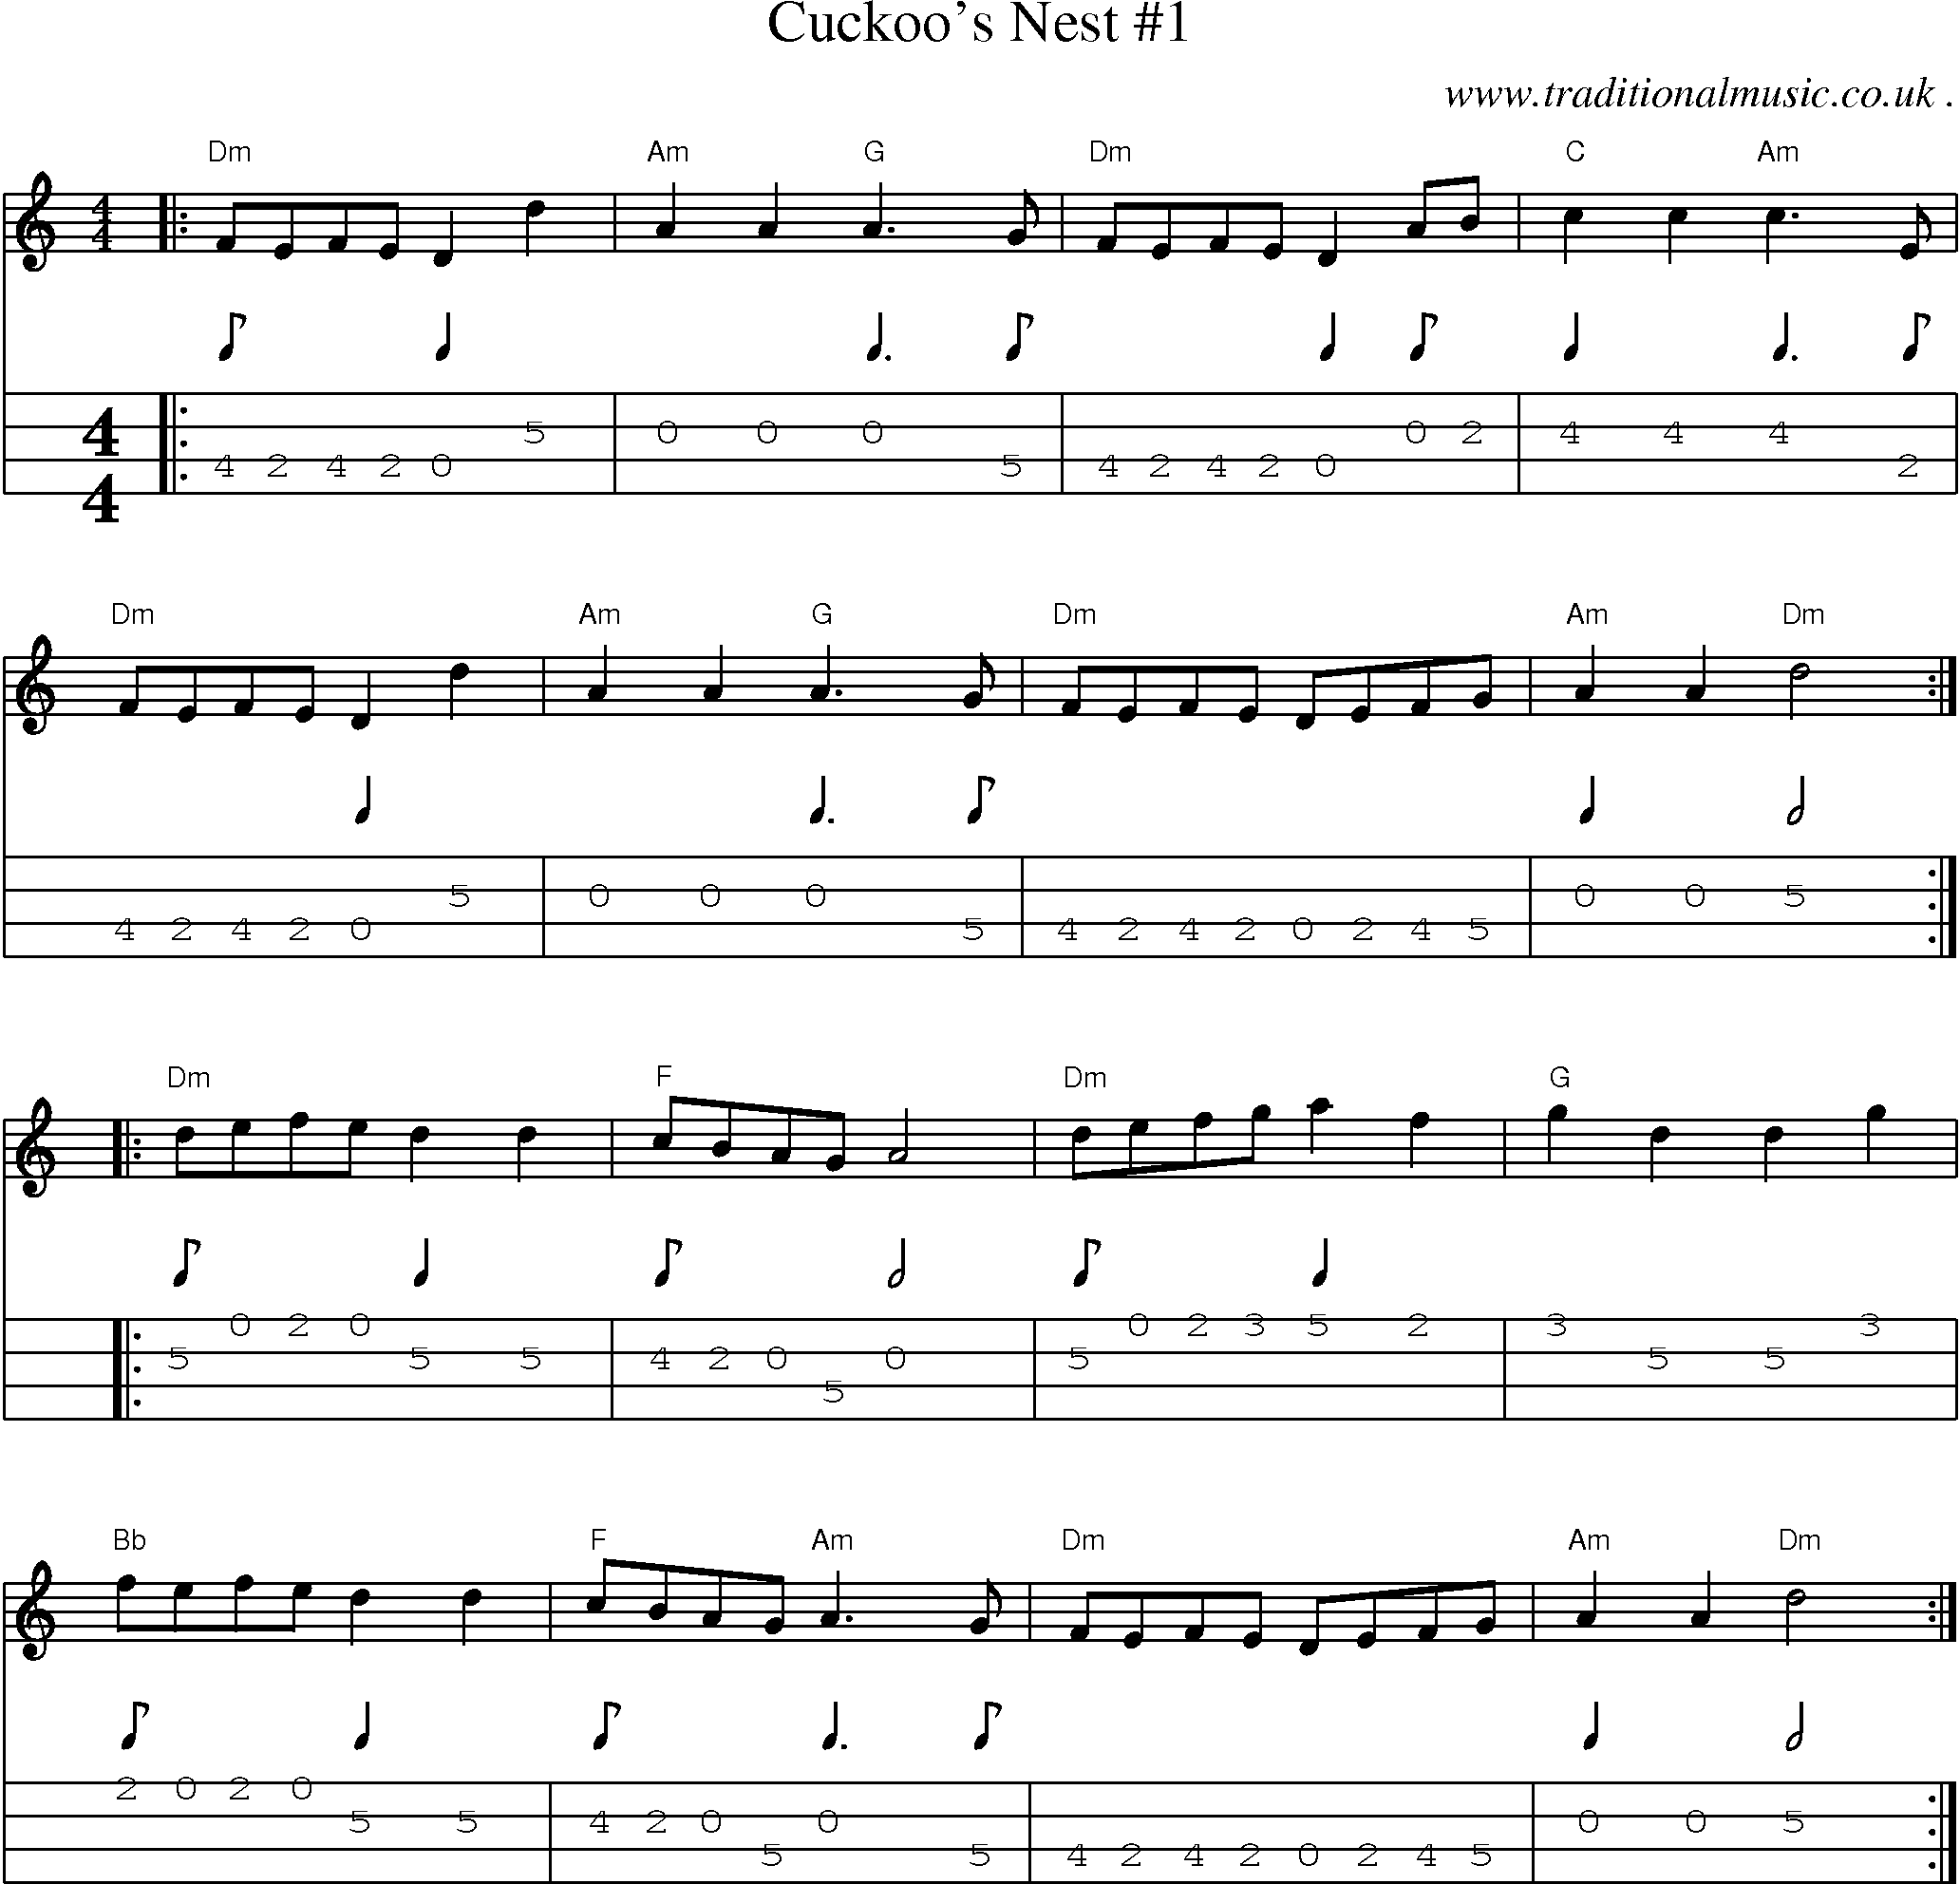 Music Score and Guitar Tabs for Cuckoos Nest 1